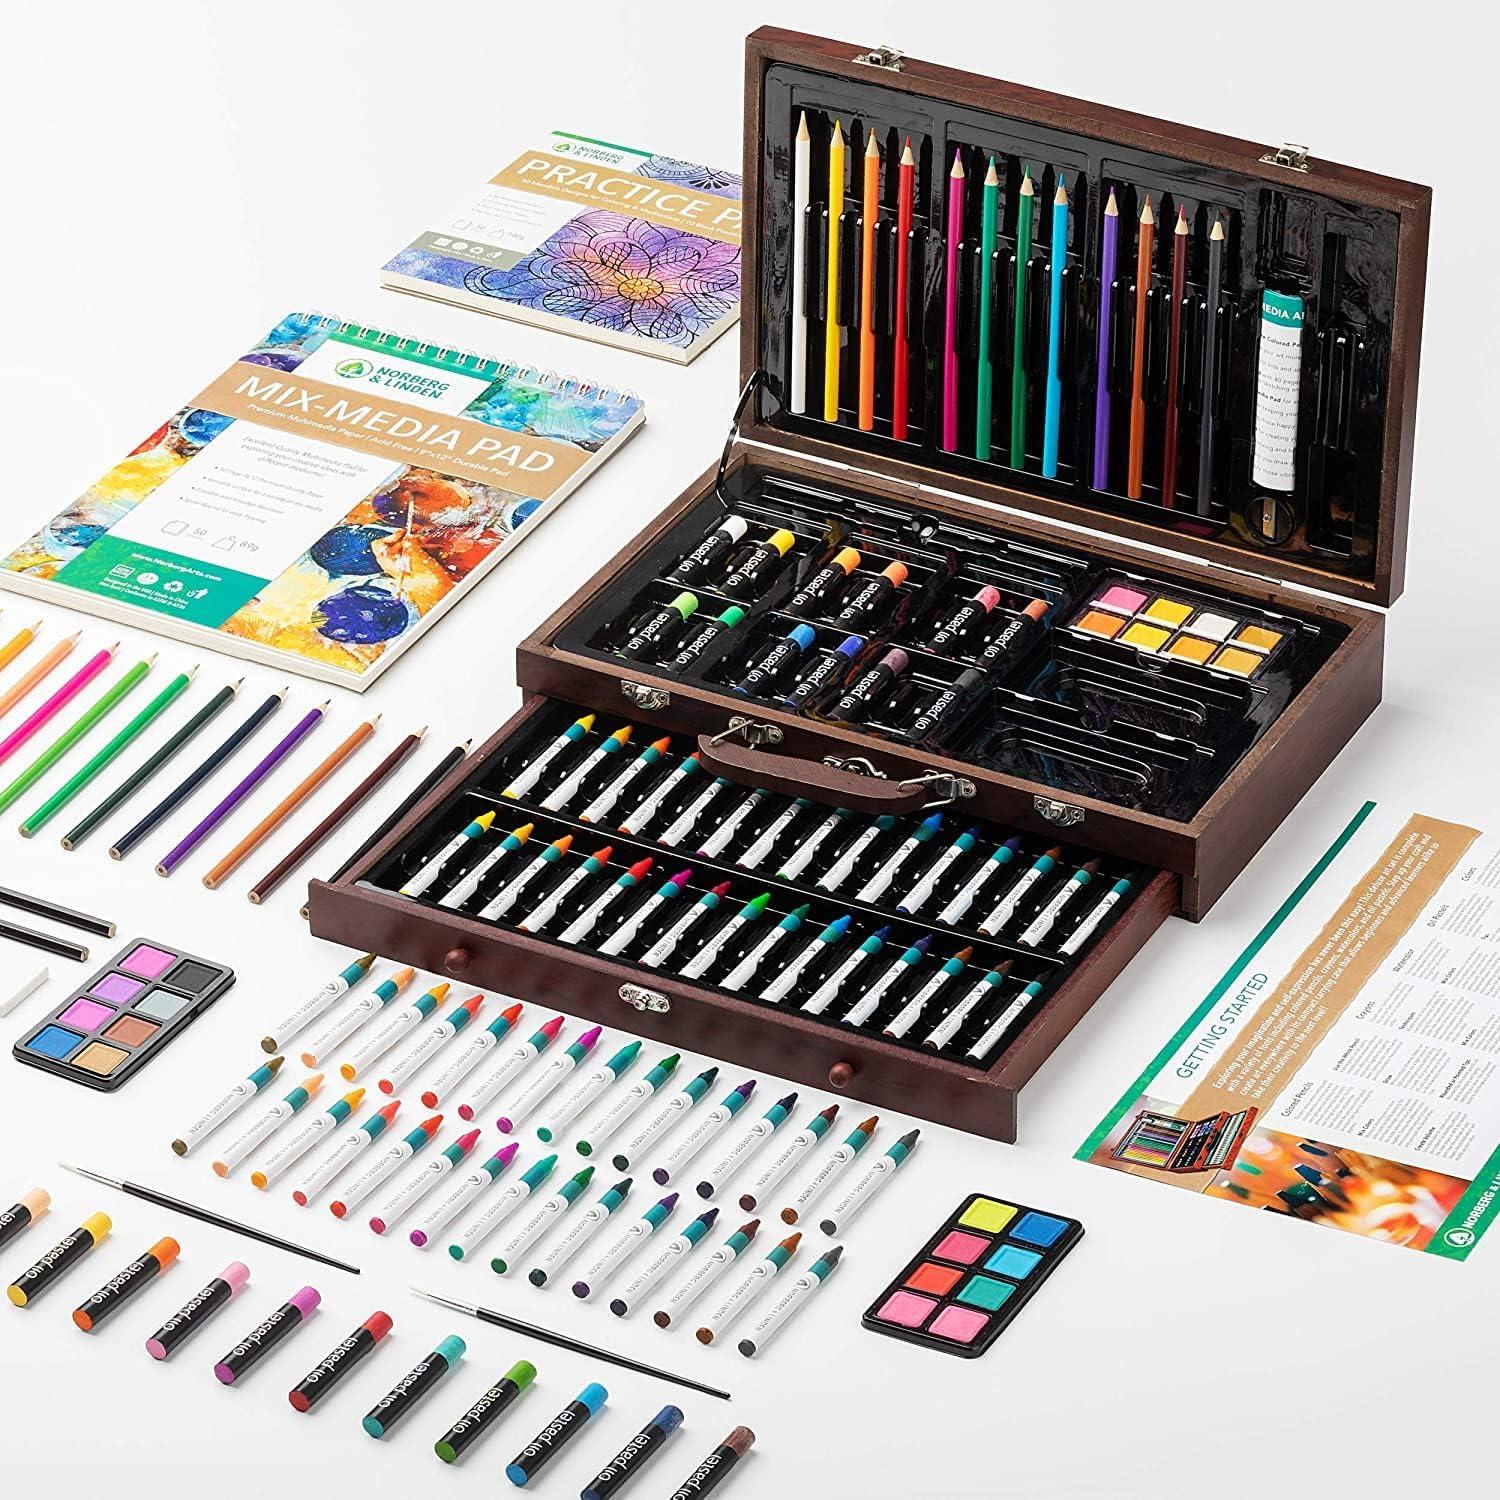 Norberg & Linden 144-Piece Art Set in Wooden Box with Drawer - Art Set for  Adults, Teens, Kids - Premium Art Supplies - Includes Watercolors, Oil